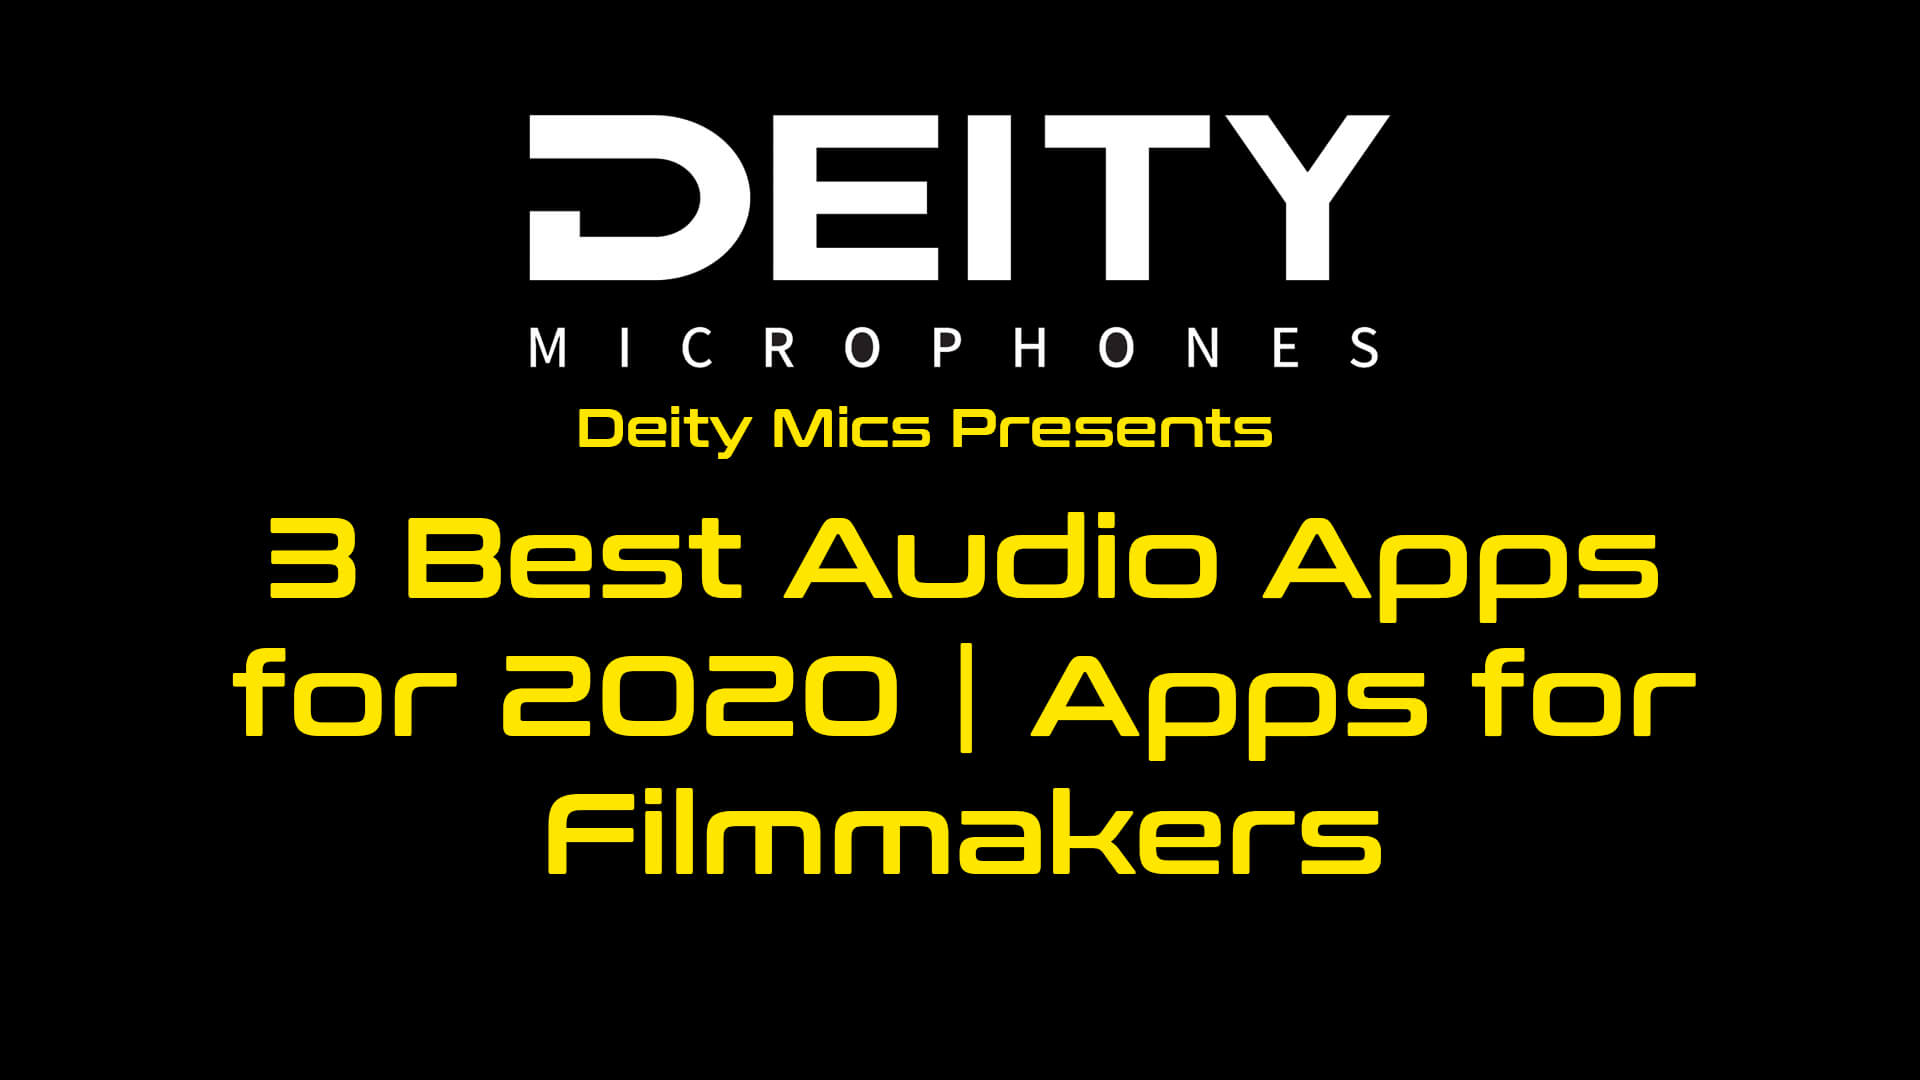 3 Best Audio Apps for 2020 | Apps for Filmmakers